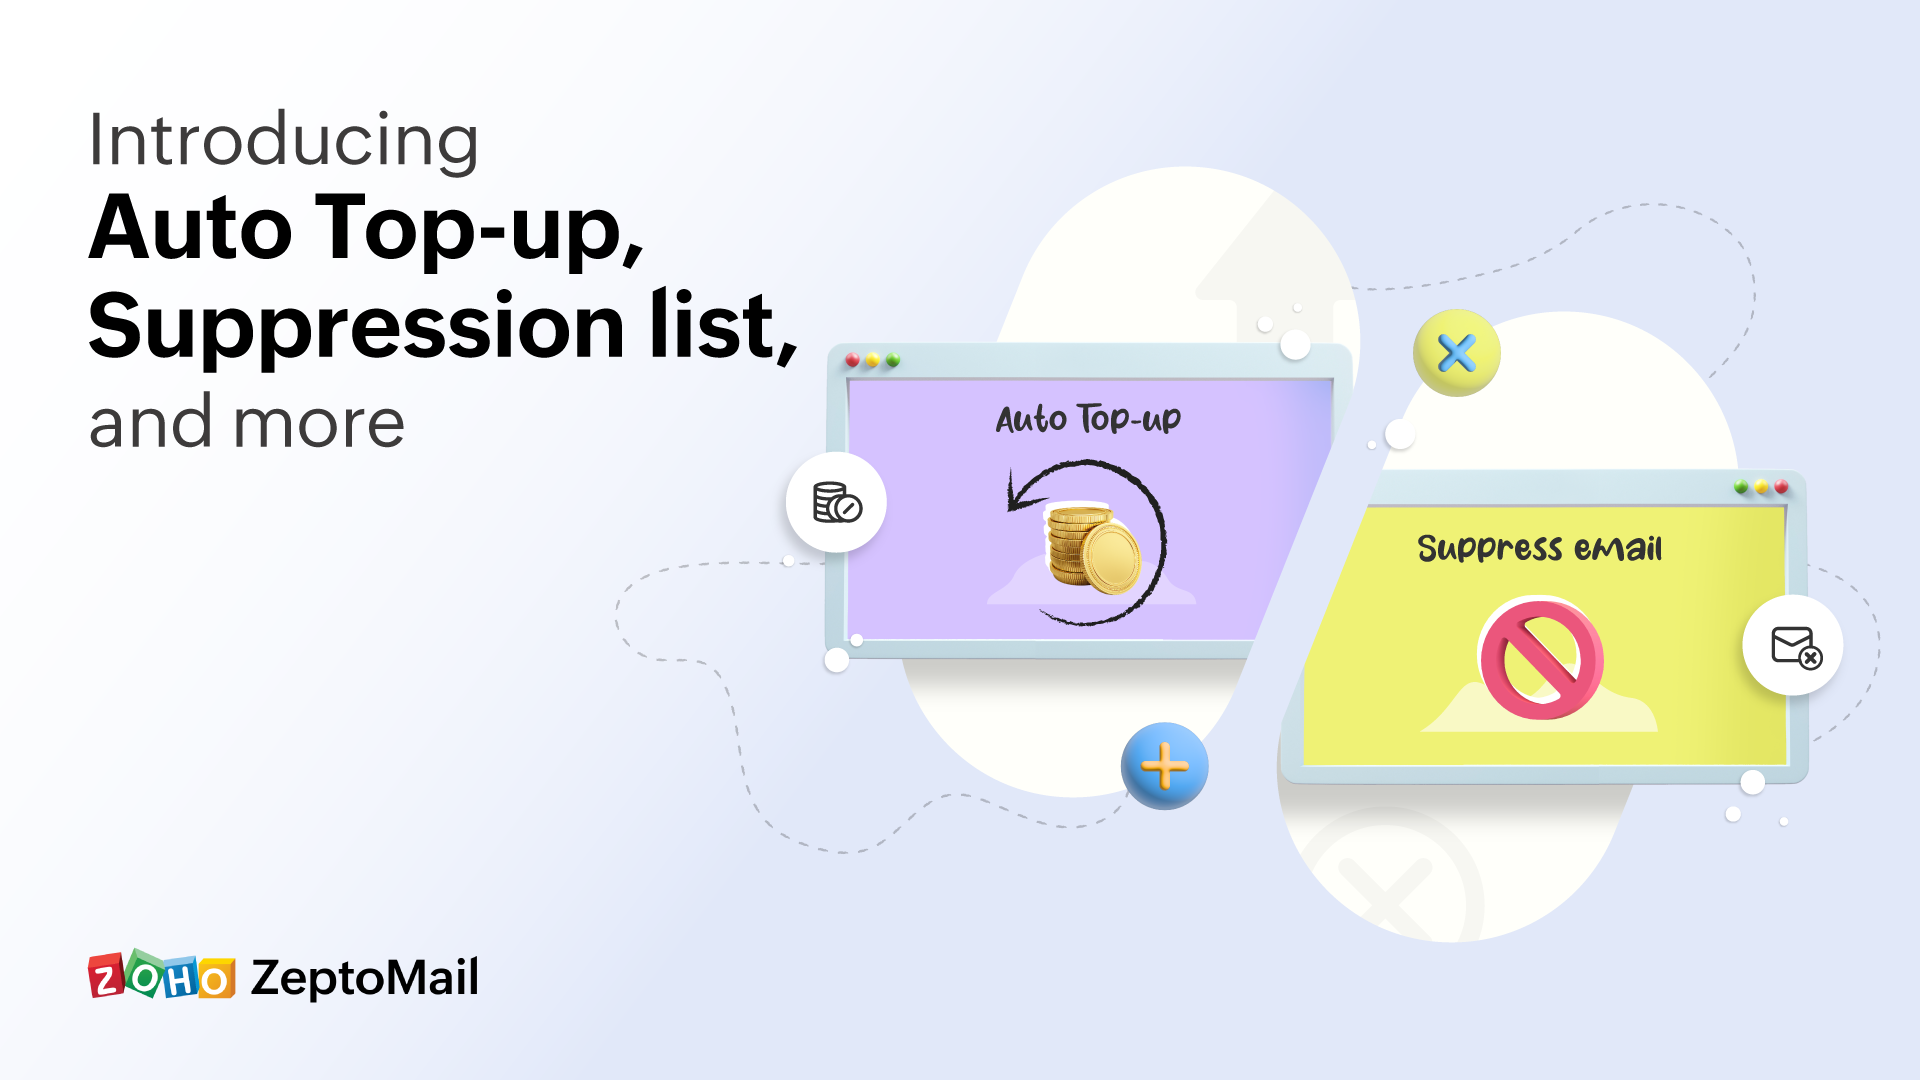 Introducing Auto Top-up, suppression list, and more